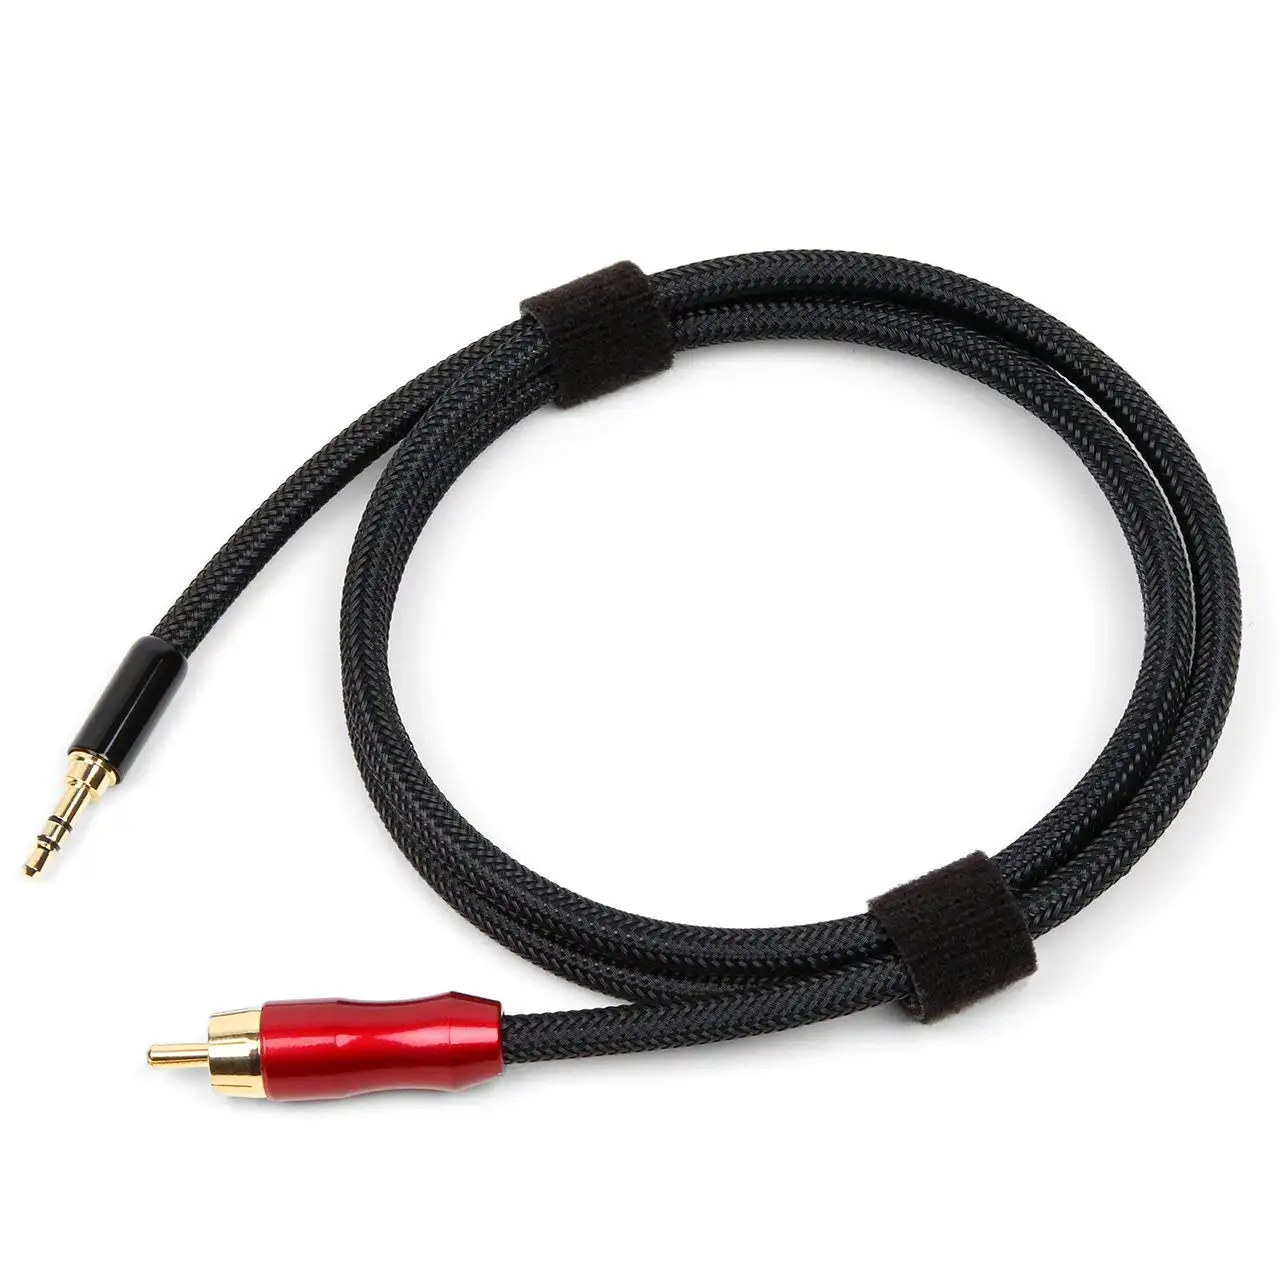 Digital coaxial audio cable 3.5mm to spdif RCA lotus head TV audio speaker cable